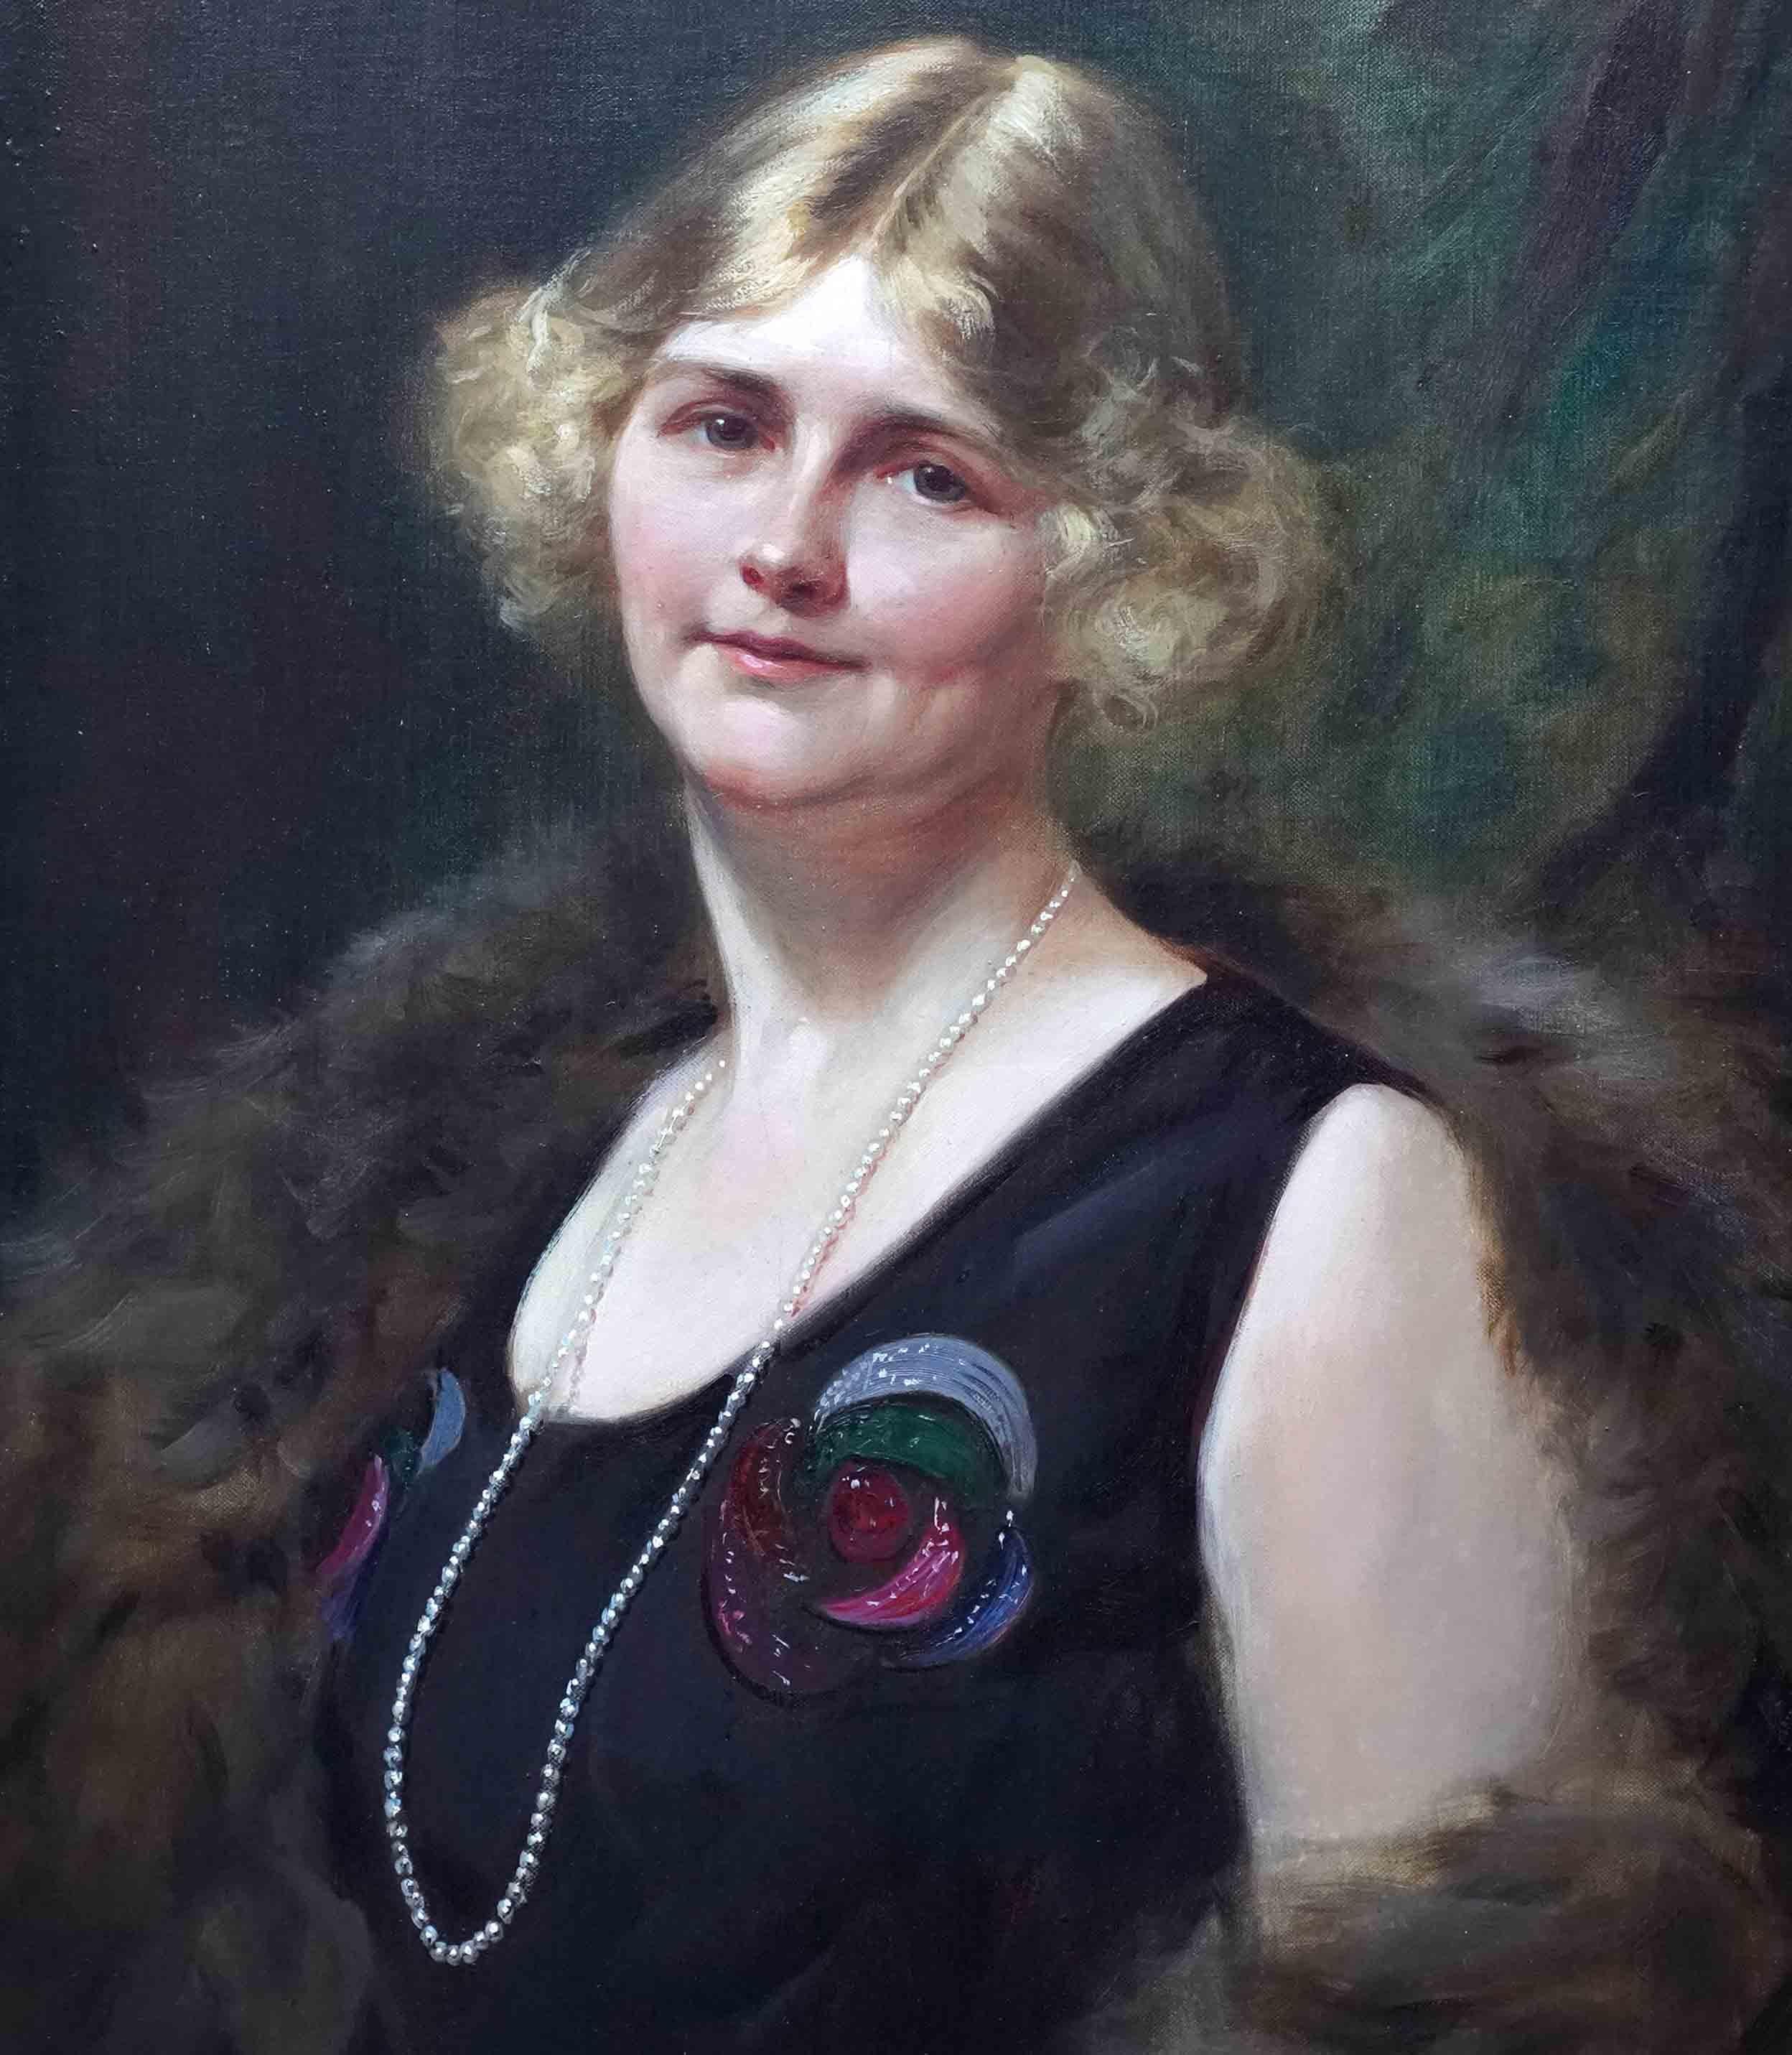 This lovely Art Deco portrait oil painting is by noted British prolific society portrait artist Leon Sprinck. Painted in 1924 it is a half length portrait of a beautiful blonde woman, stood smiling at the artist/viewer, her head tilted to one side.